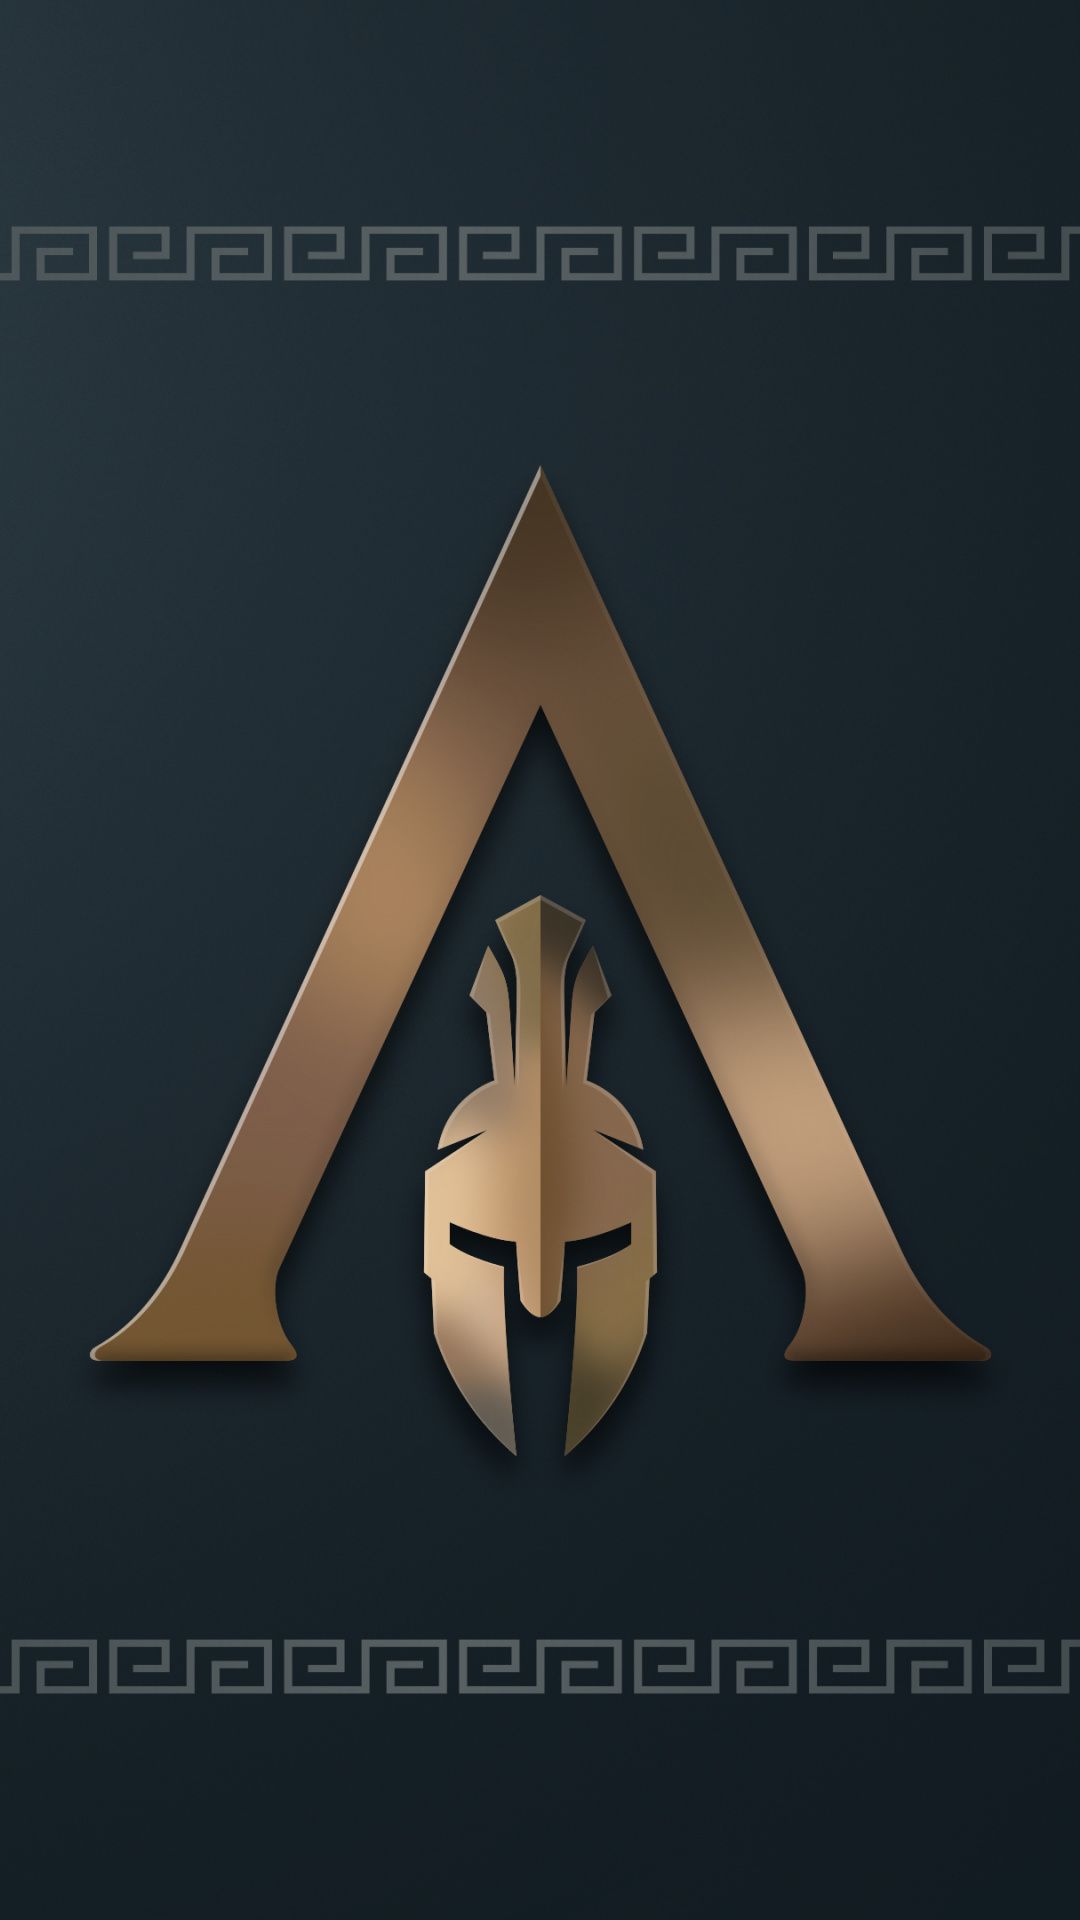 Ubisoft's game, Assassin's Creed Odyssey, minimal wallpaper